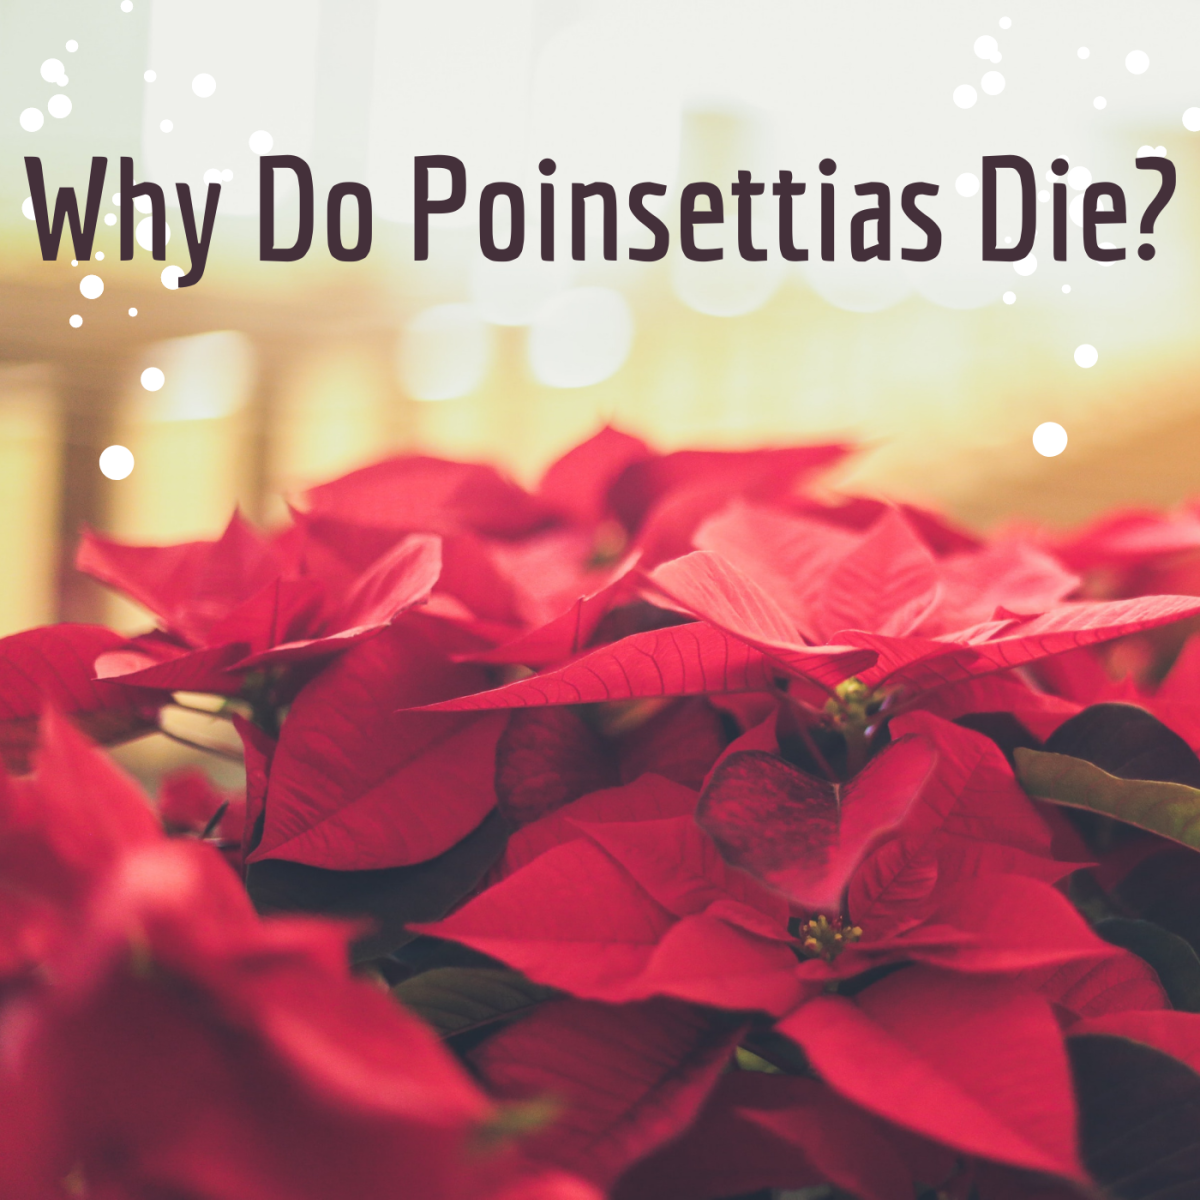 Why Do Poinsettias Die After Christmas?